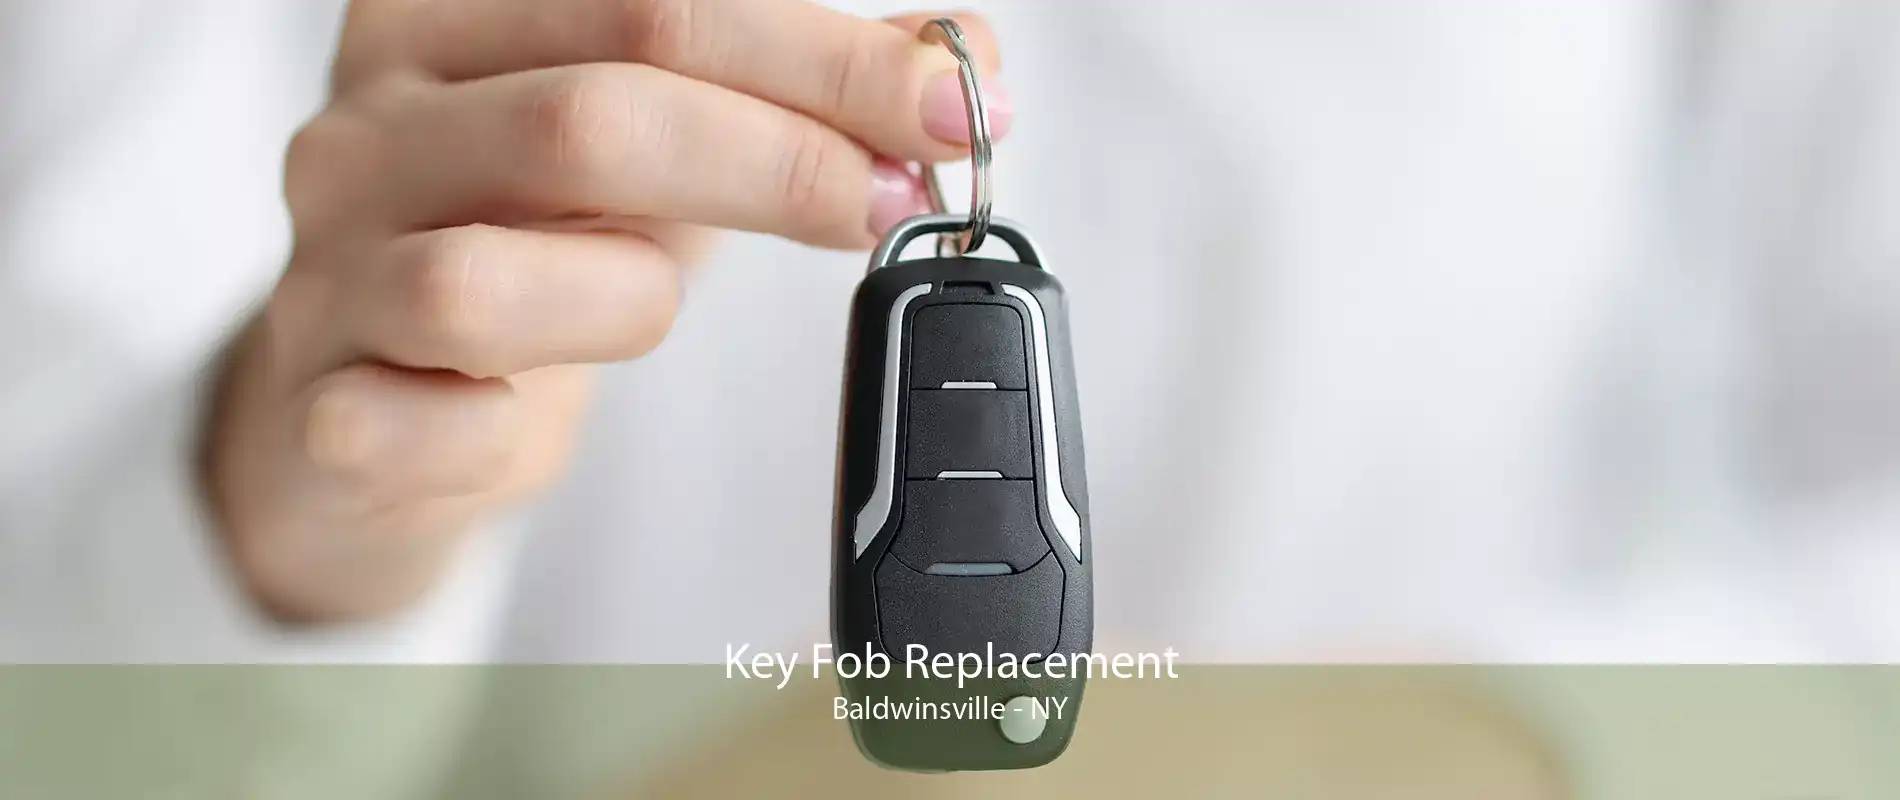 Key Fob Replacement Baldwinsville - NY